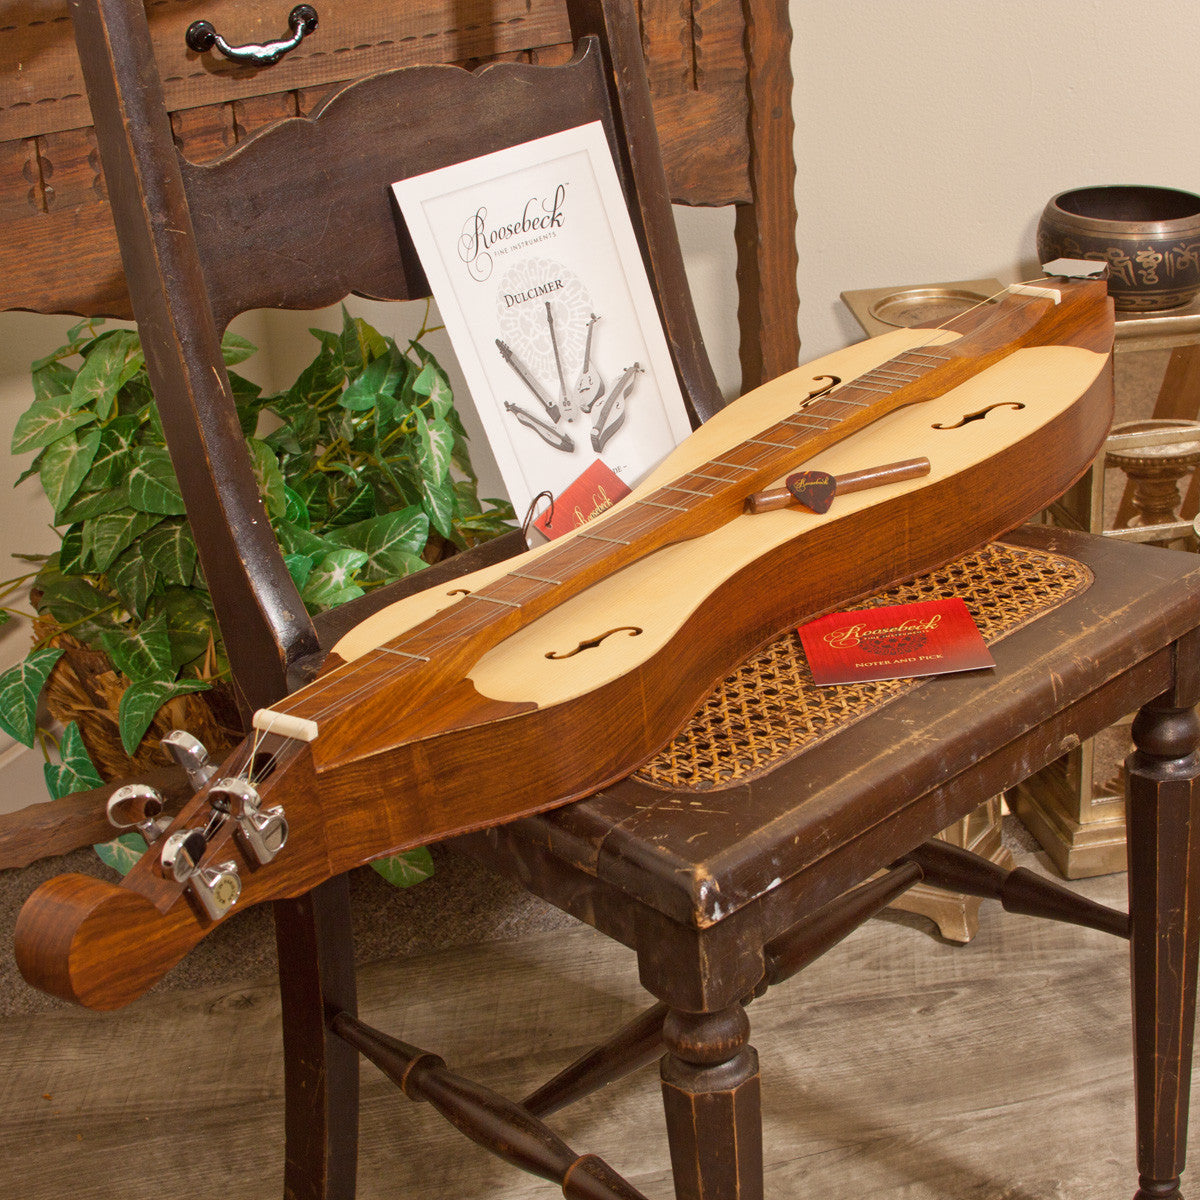 Roosebeck Grace mountain dulcimer sideview, 4 strings, vaulted fretboard.